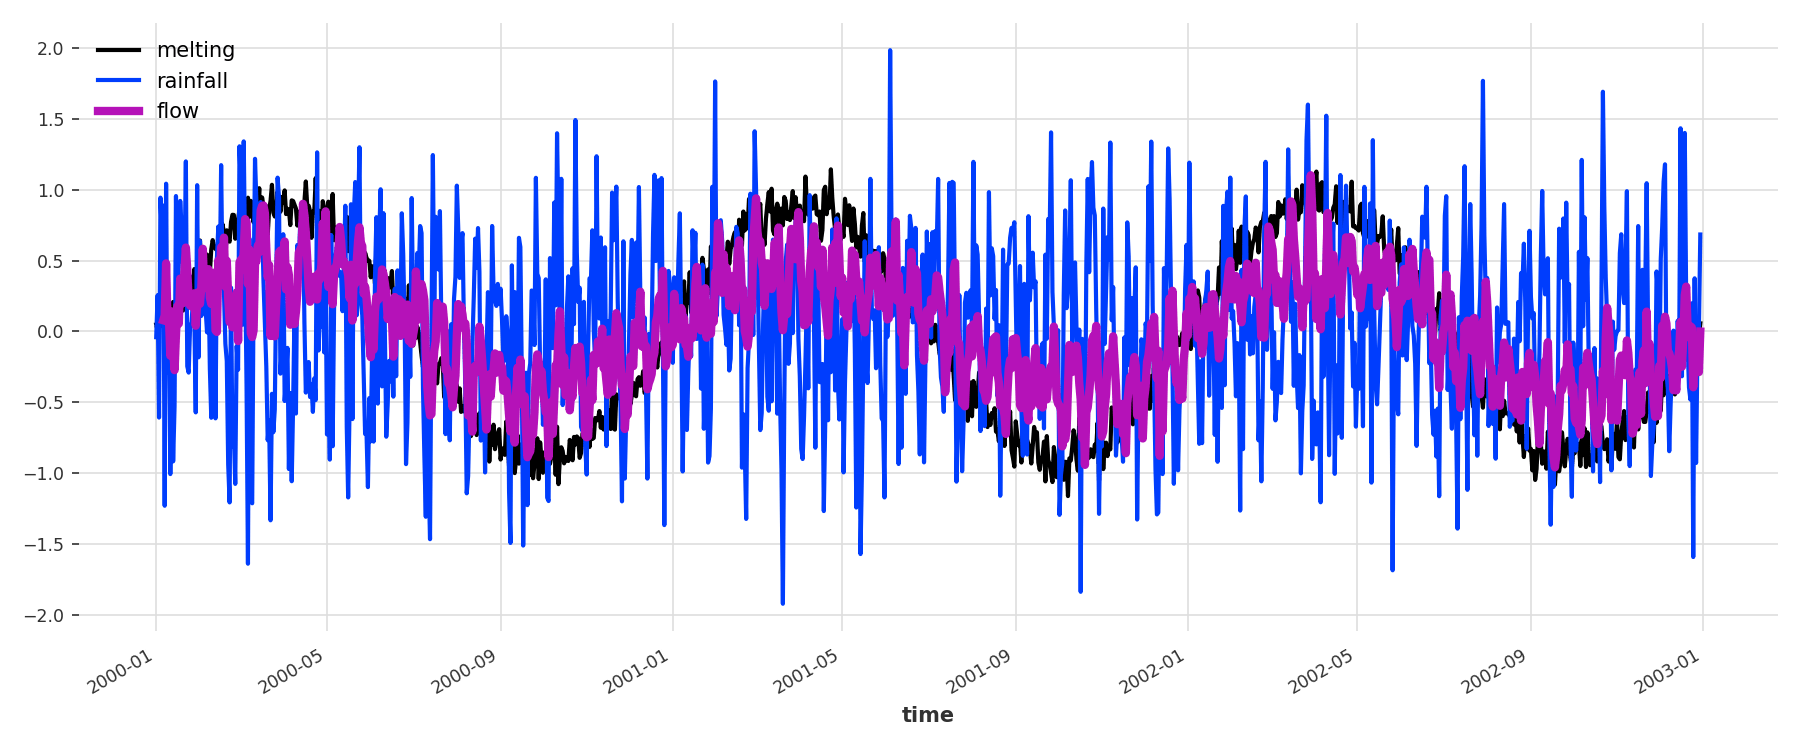 Our synthetic daily dataset representing the flow as a sum of lagged glacier melting and rainfalls. The dataset starts in January 2000 and lasts 3 years.